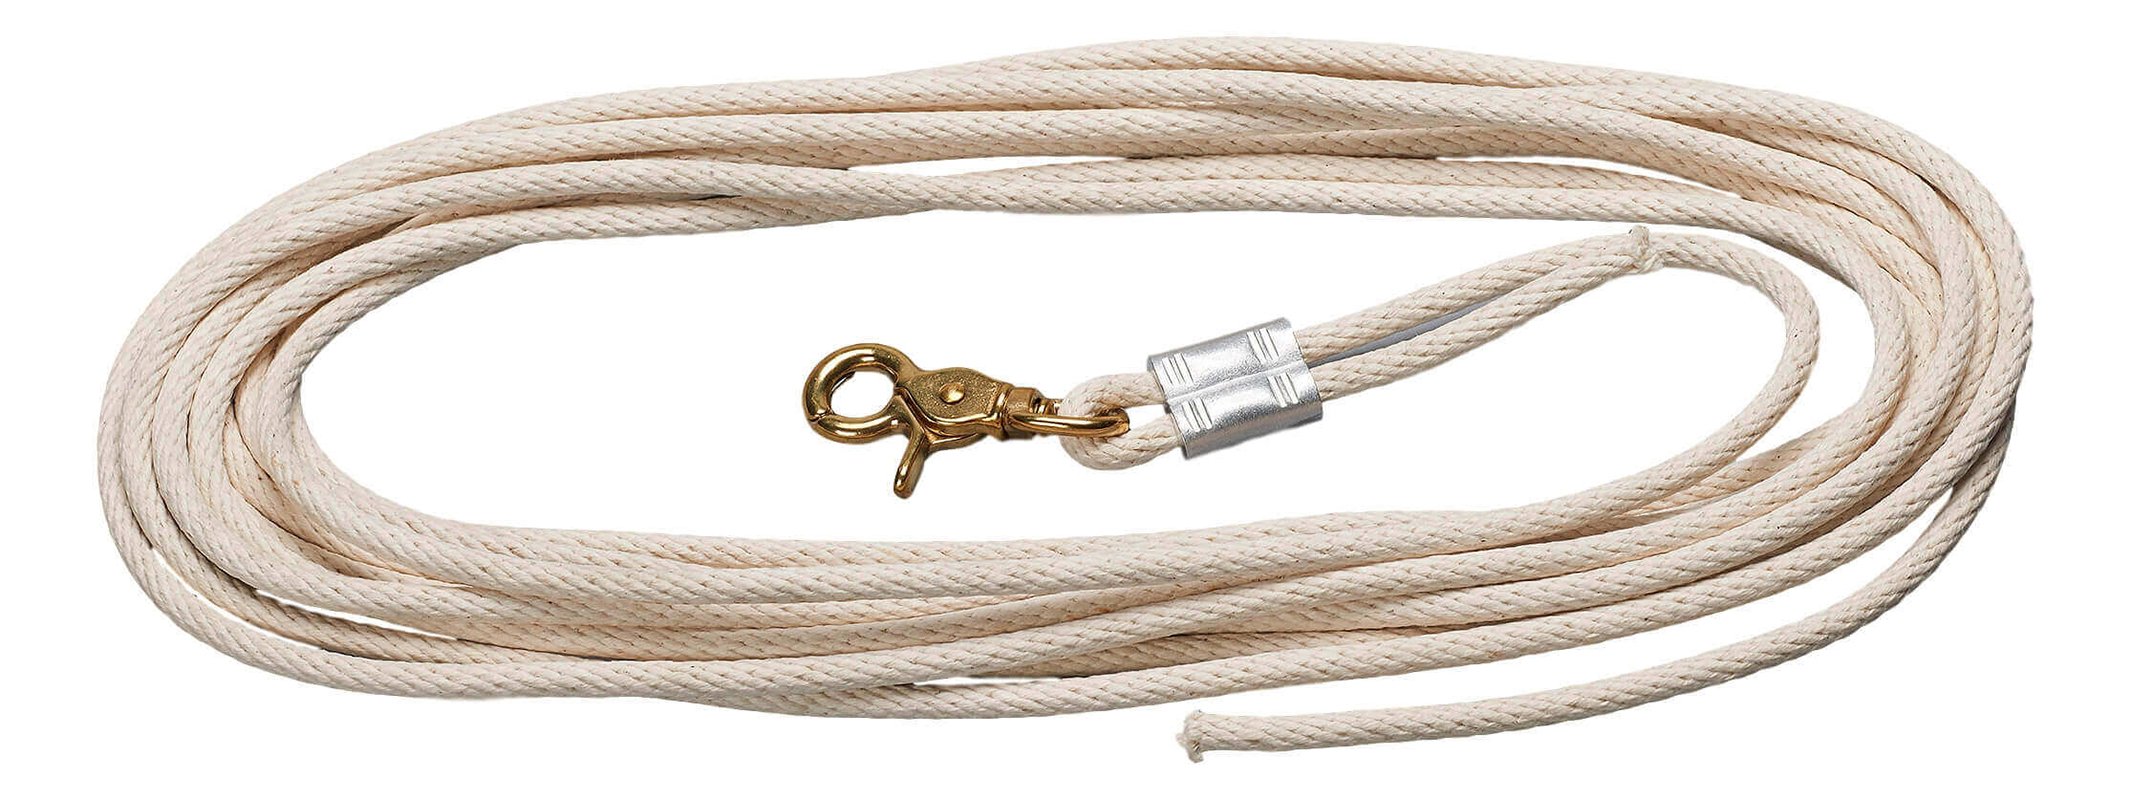 27673-007 Thief Rope Plain with Fittings, 18'